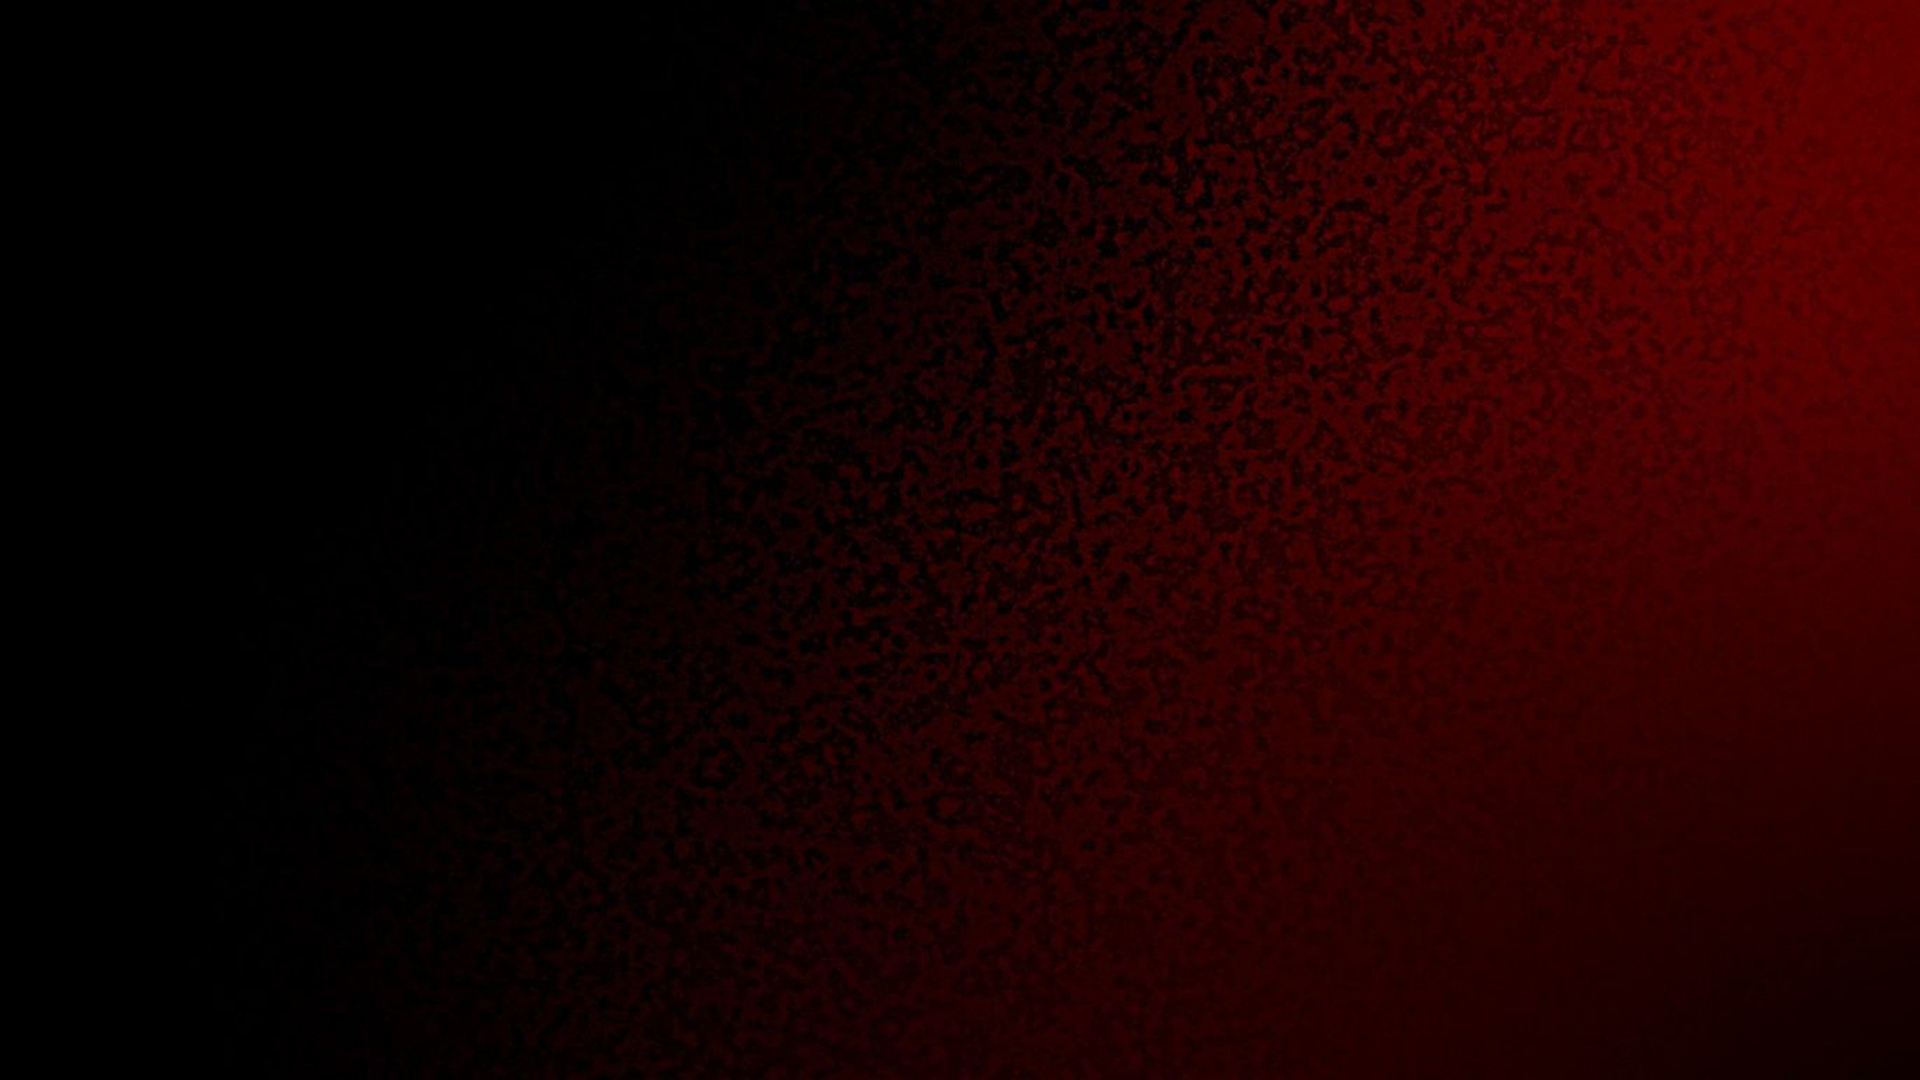 Red And Black Aesthetic Laptop Wallpapers